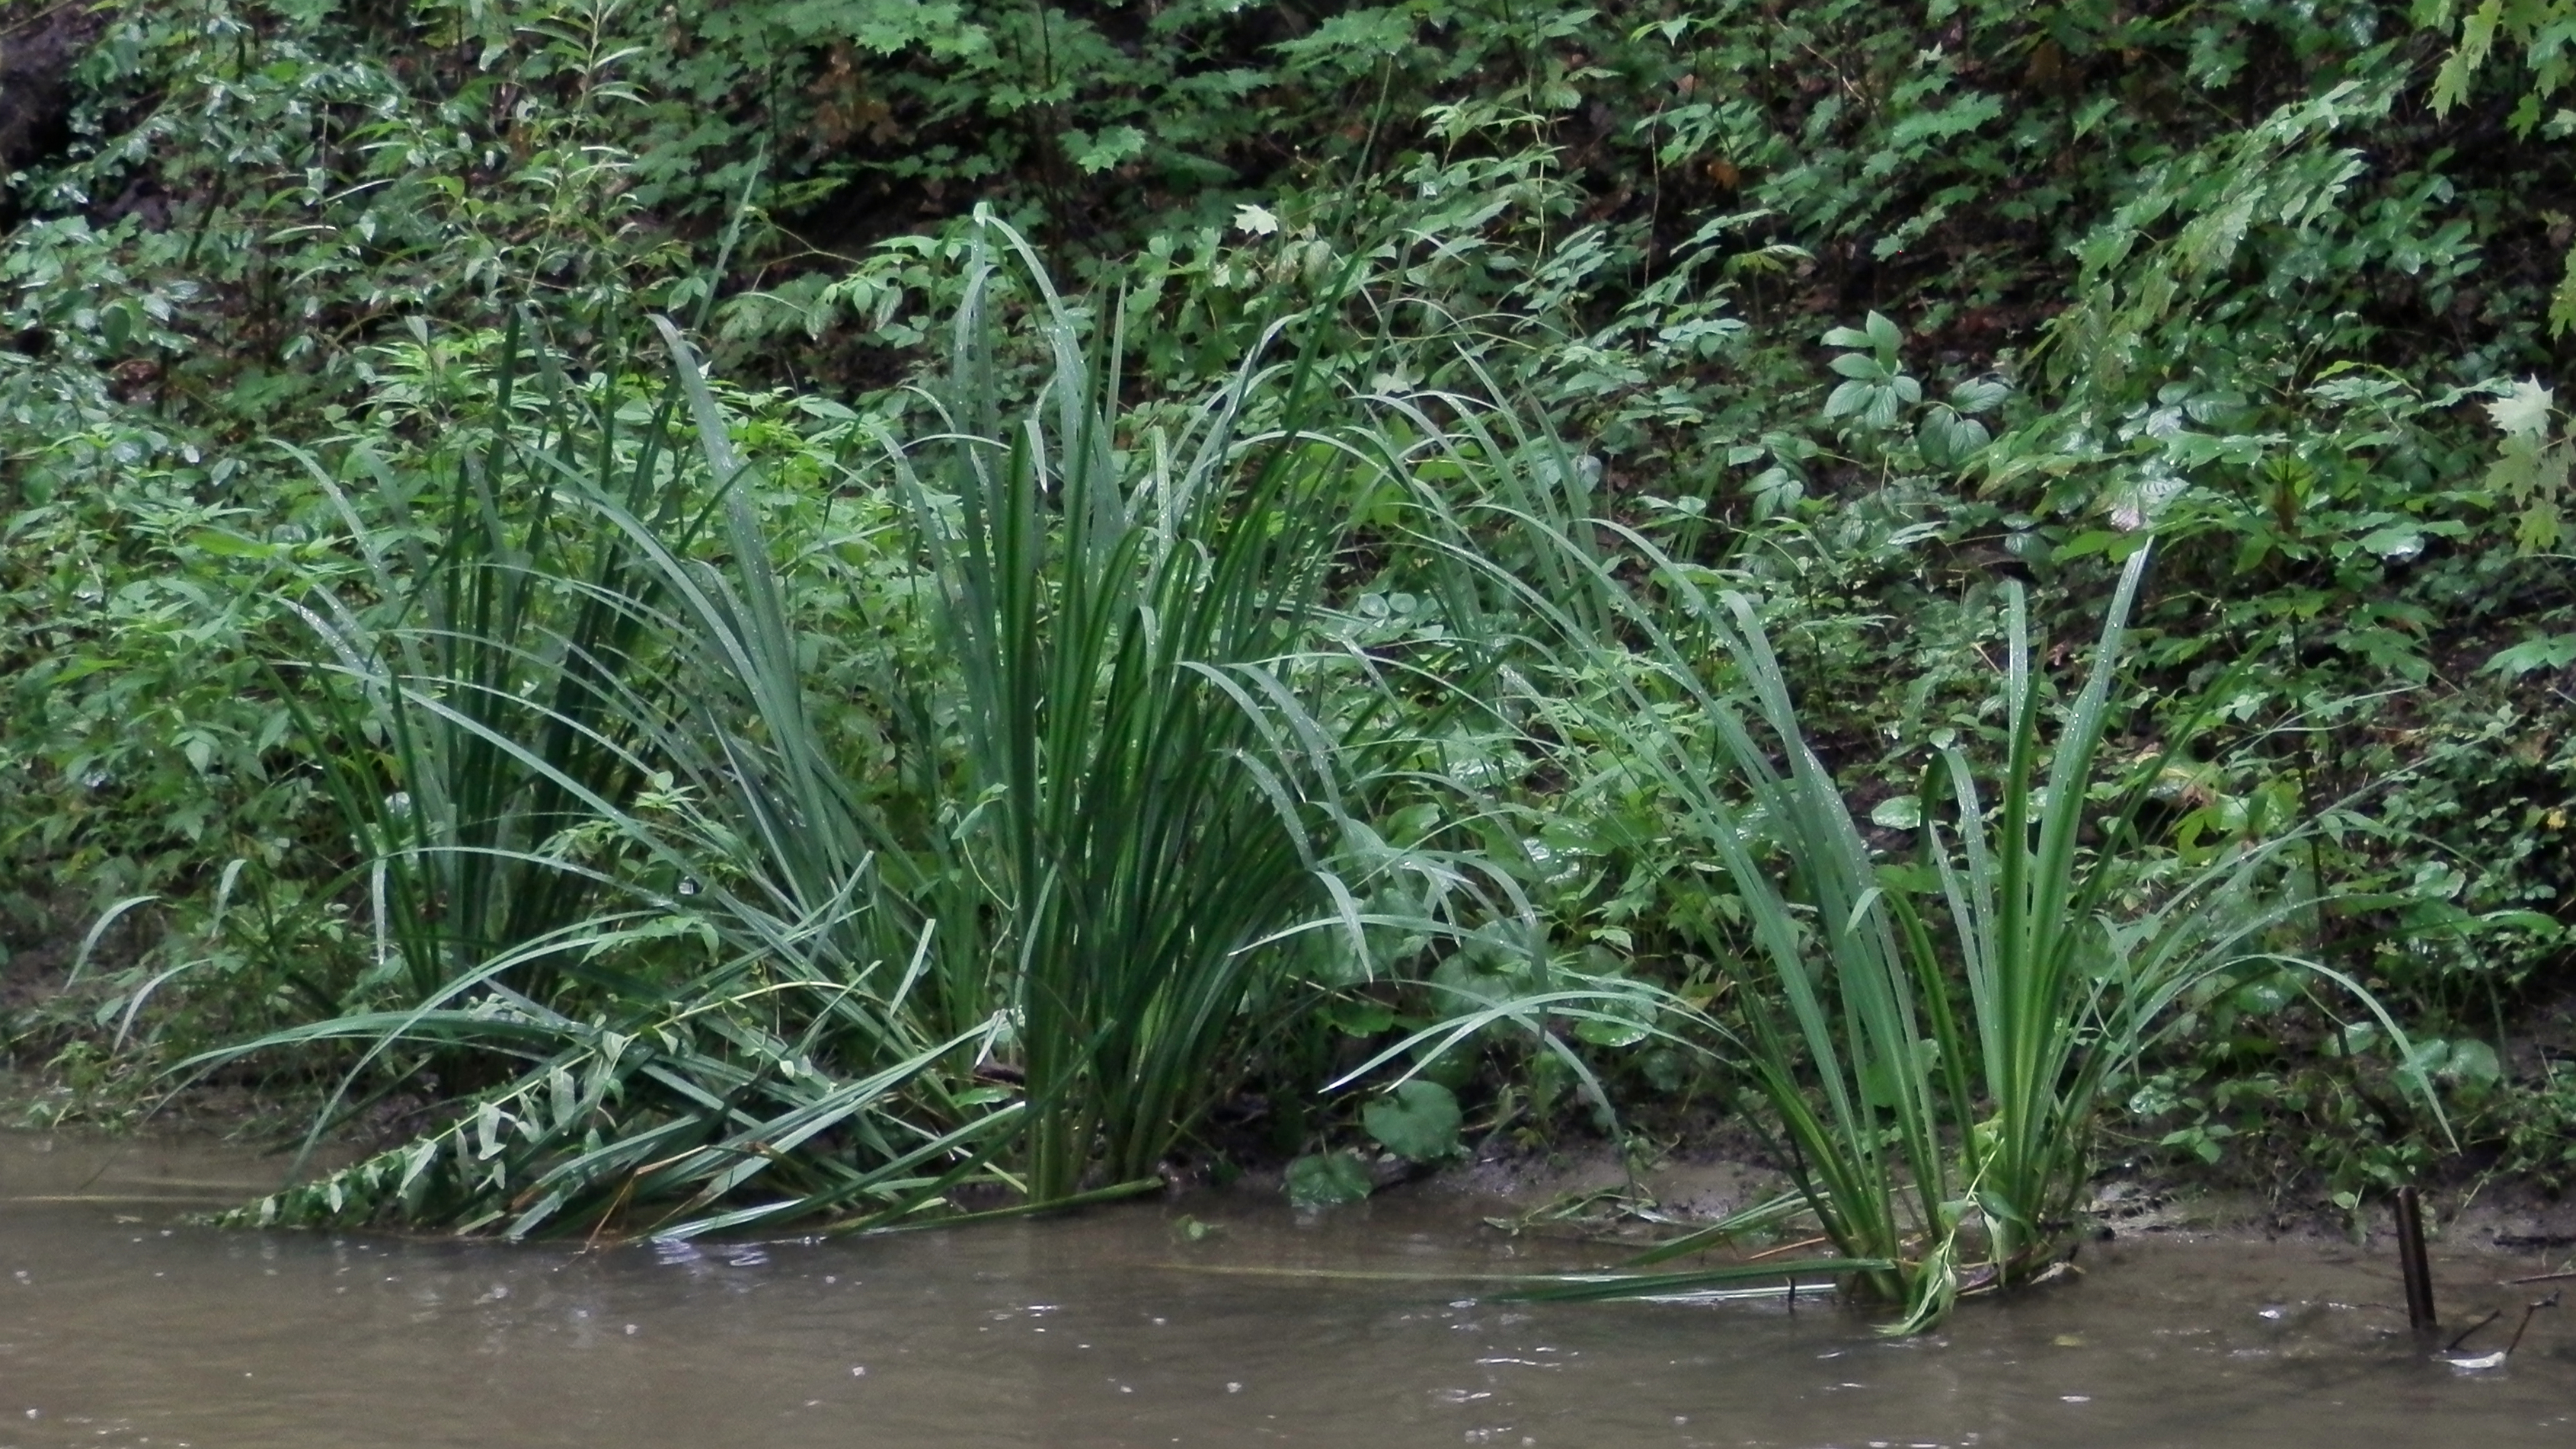 Tall, thin leaves of Acorus americanus growing along the bank of a stream